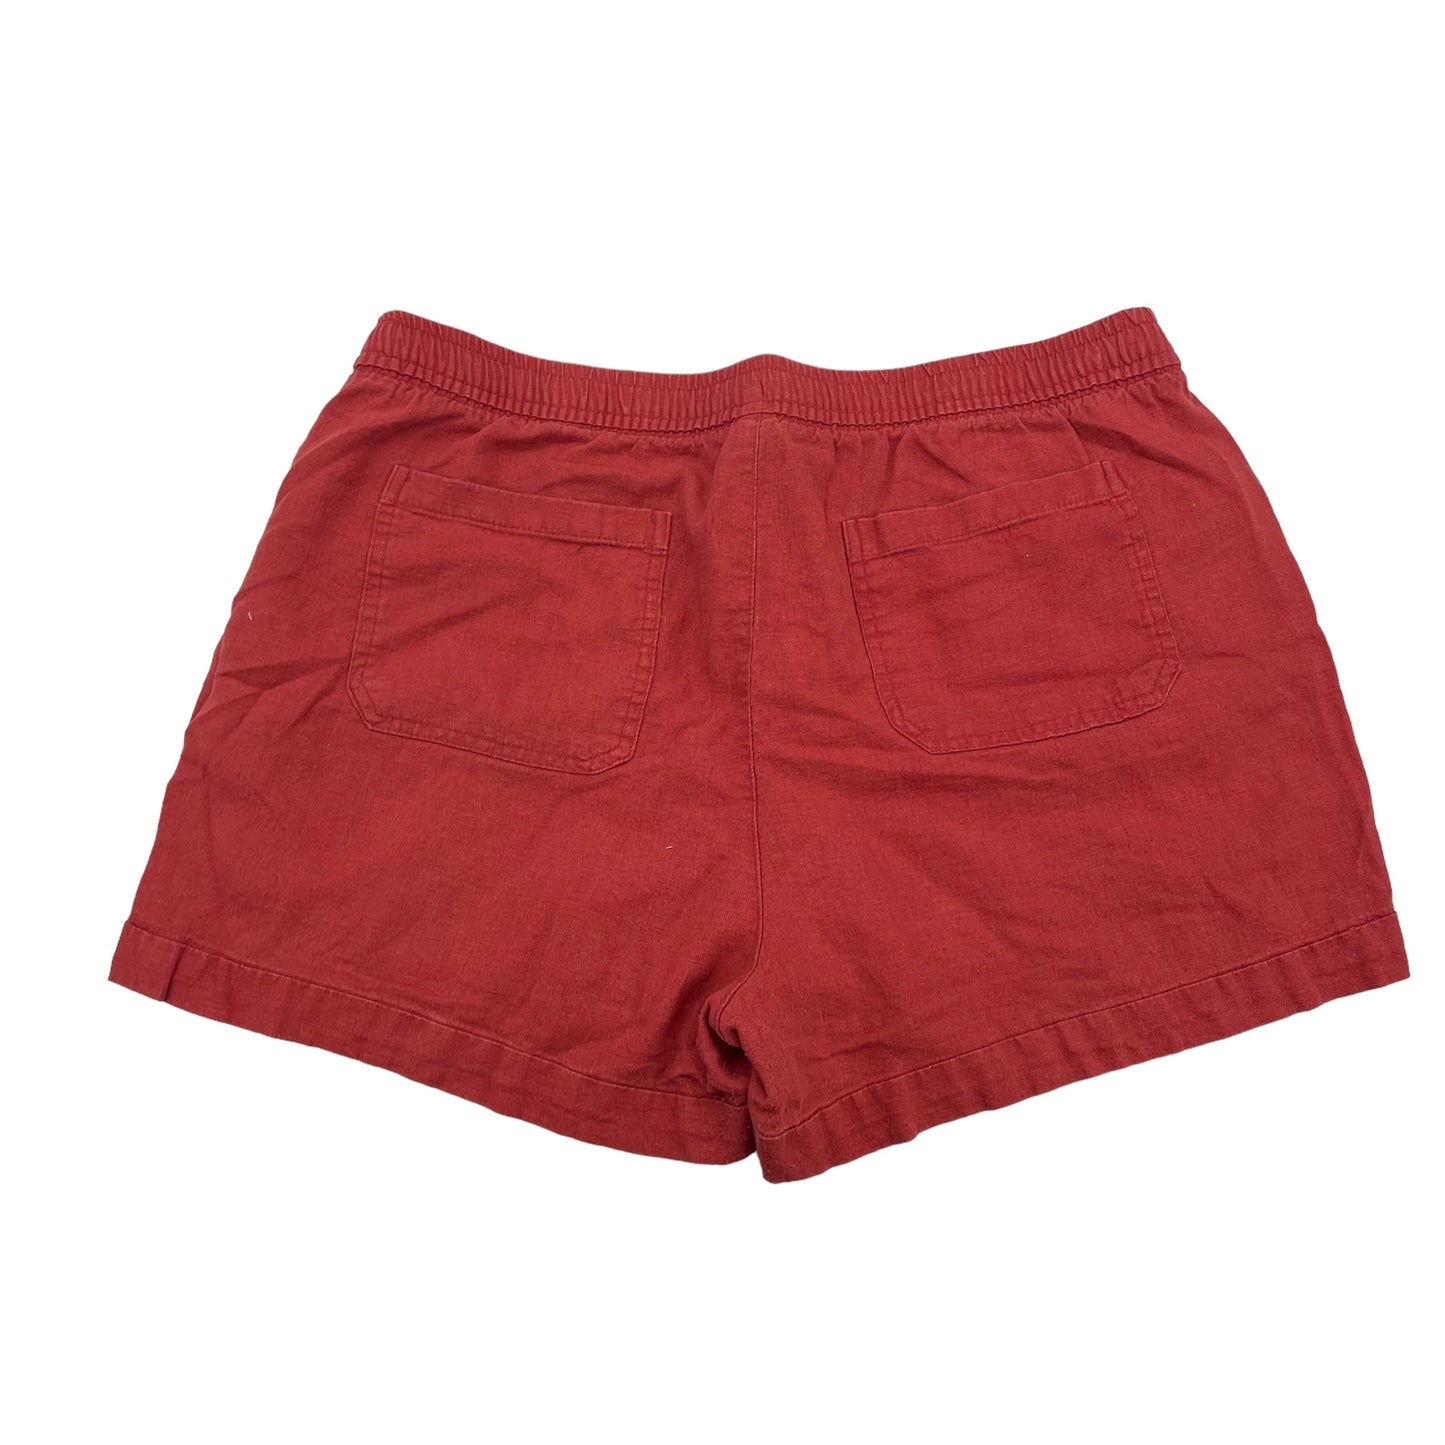 Red Shorts Old Navy, Size L